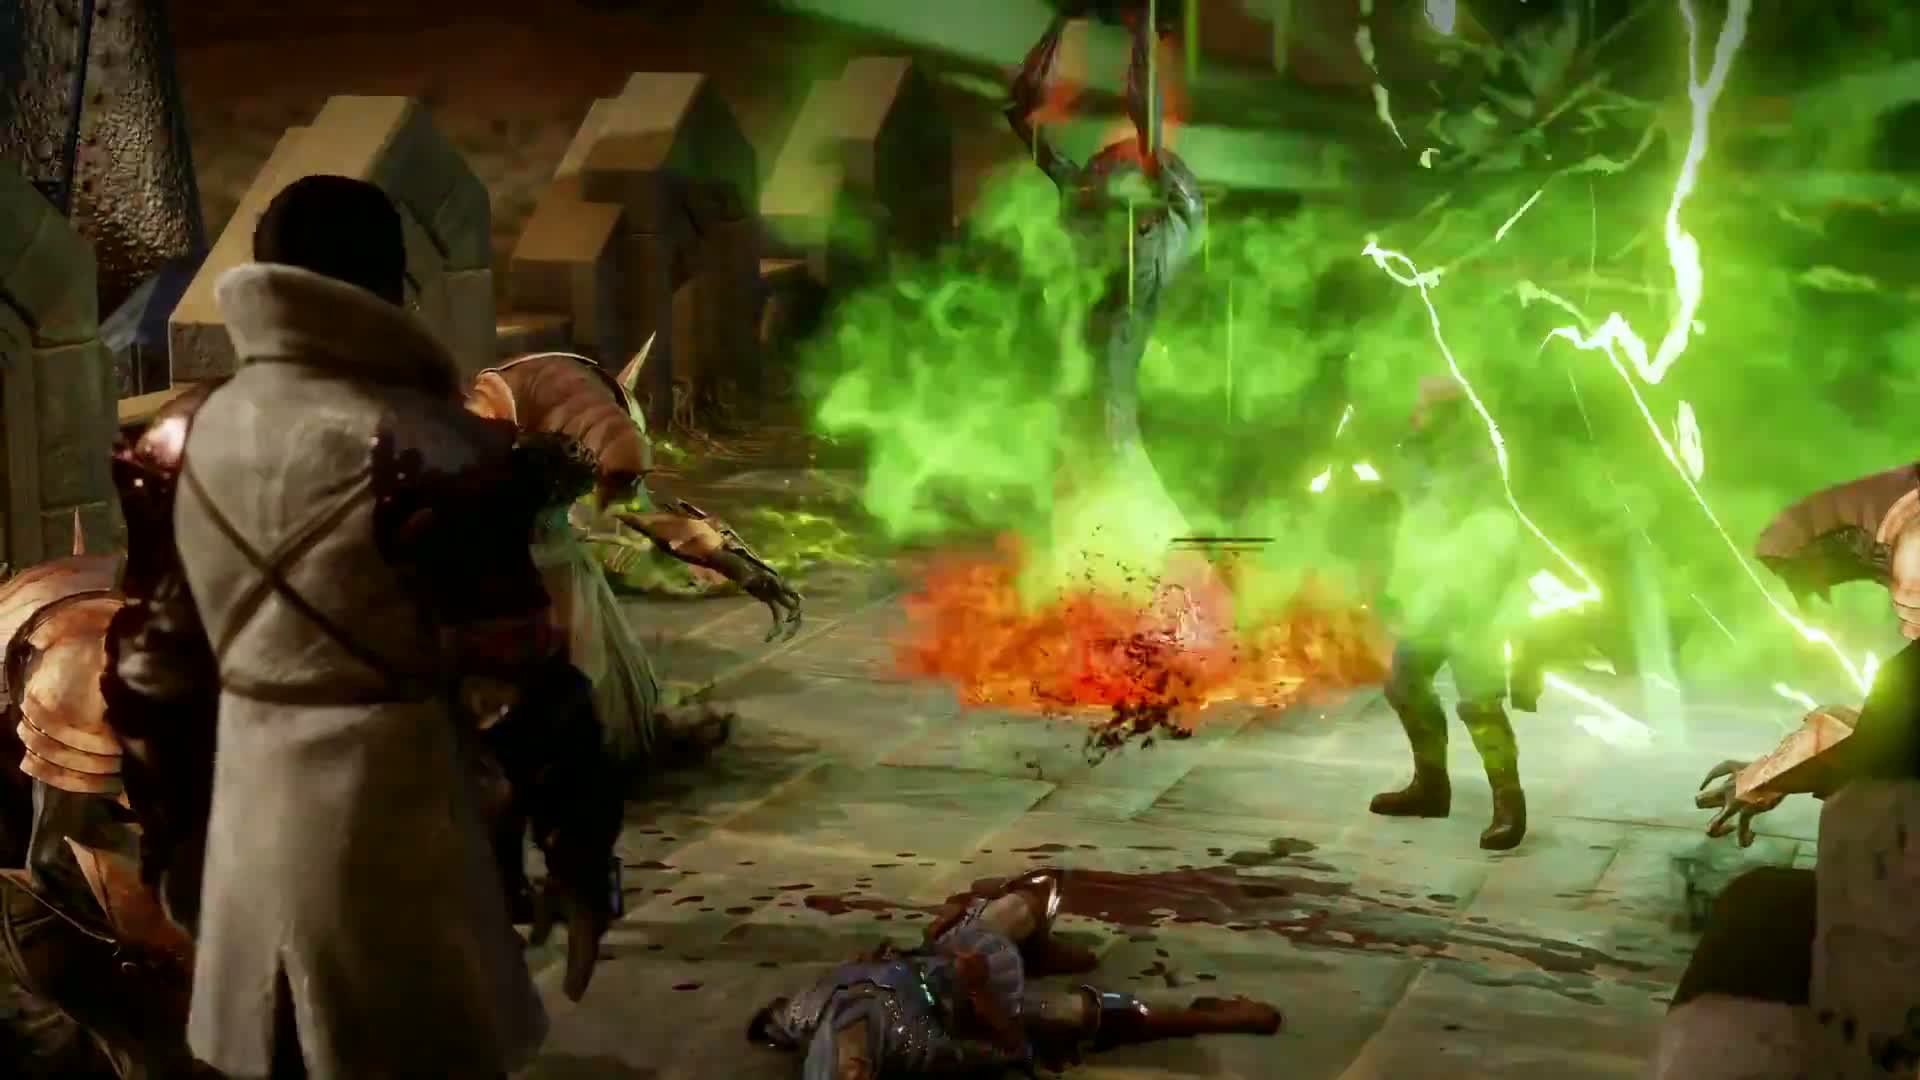 Dragon Age 3 Inquisition - Wrong Choices Gameplay Trailer